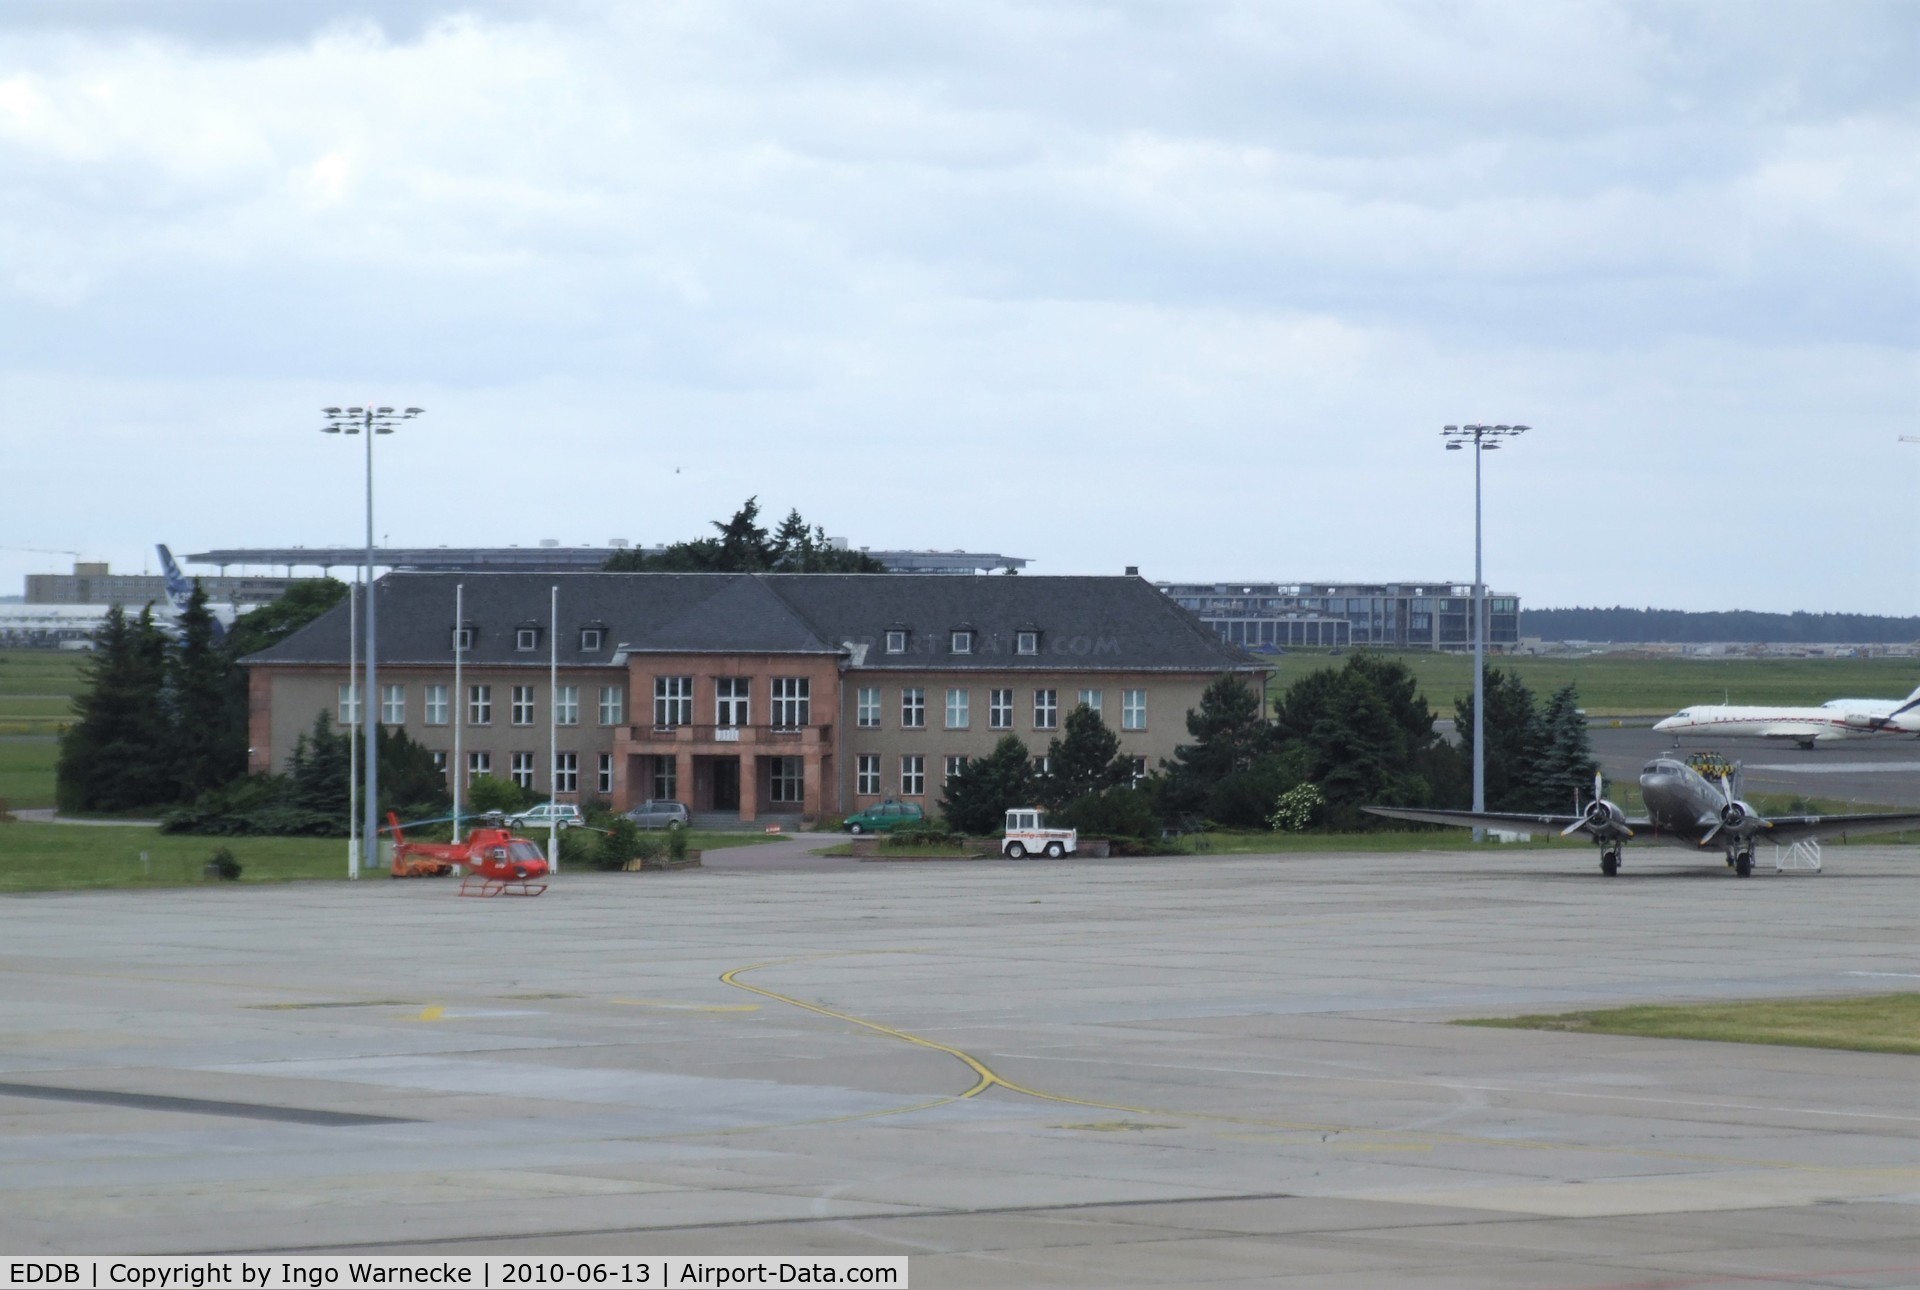 Berlin Brandenburg International Airport, Berlin Germany (EDDB) - looking at the apron and the so called 'General's Hotel' at Schönefeld airport